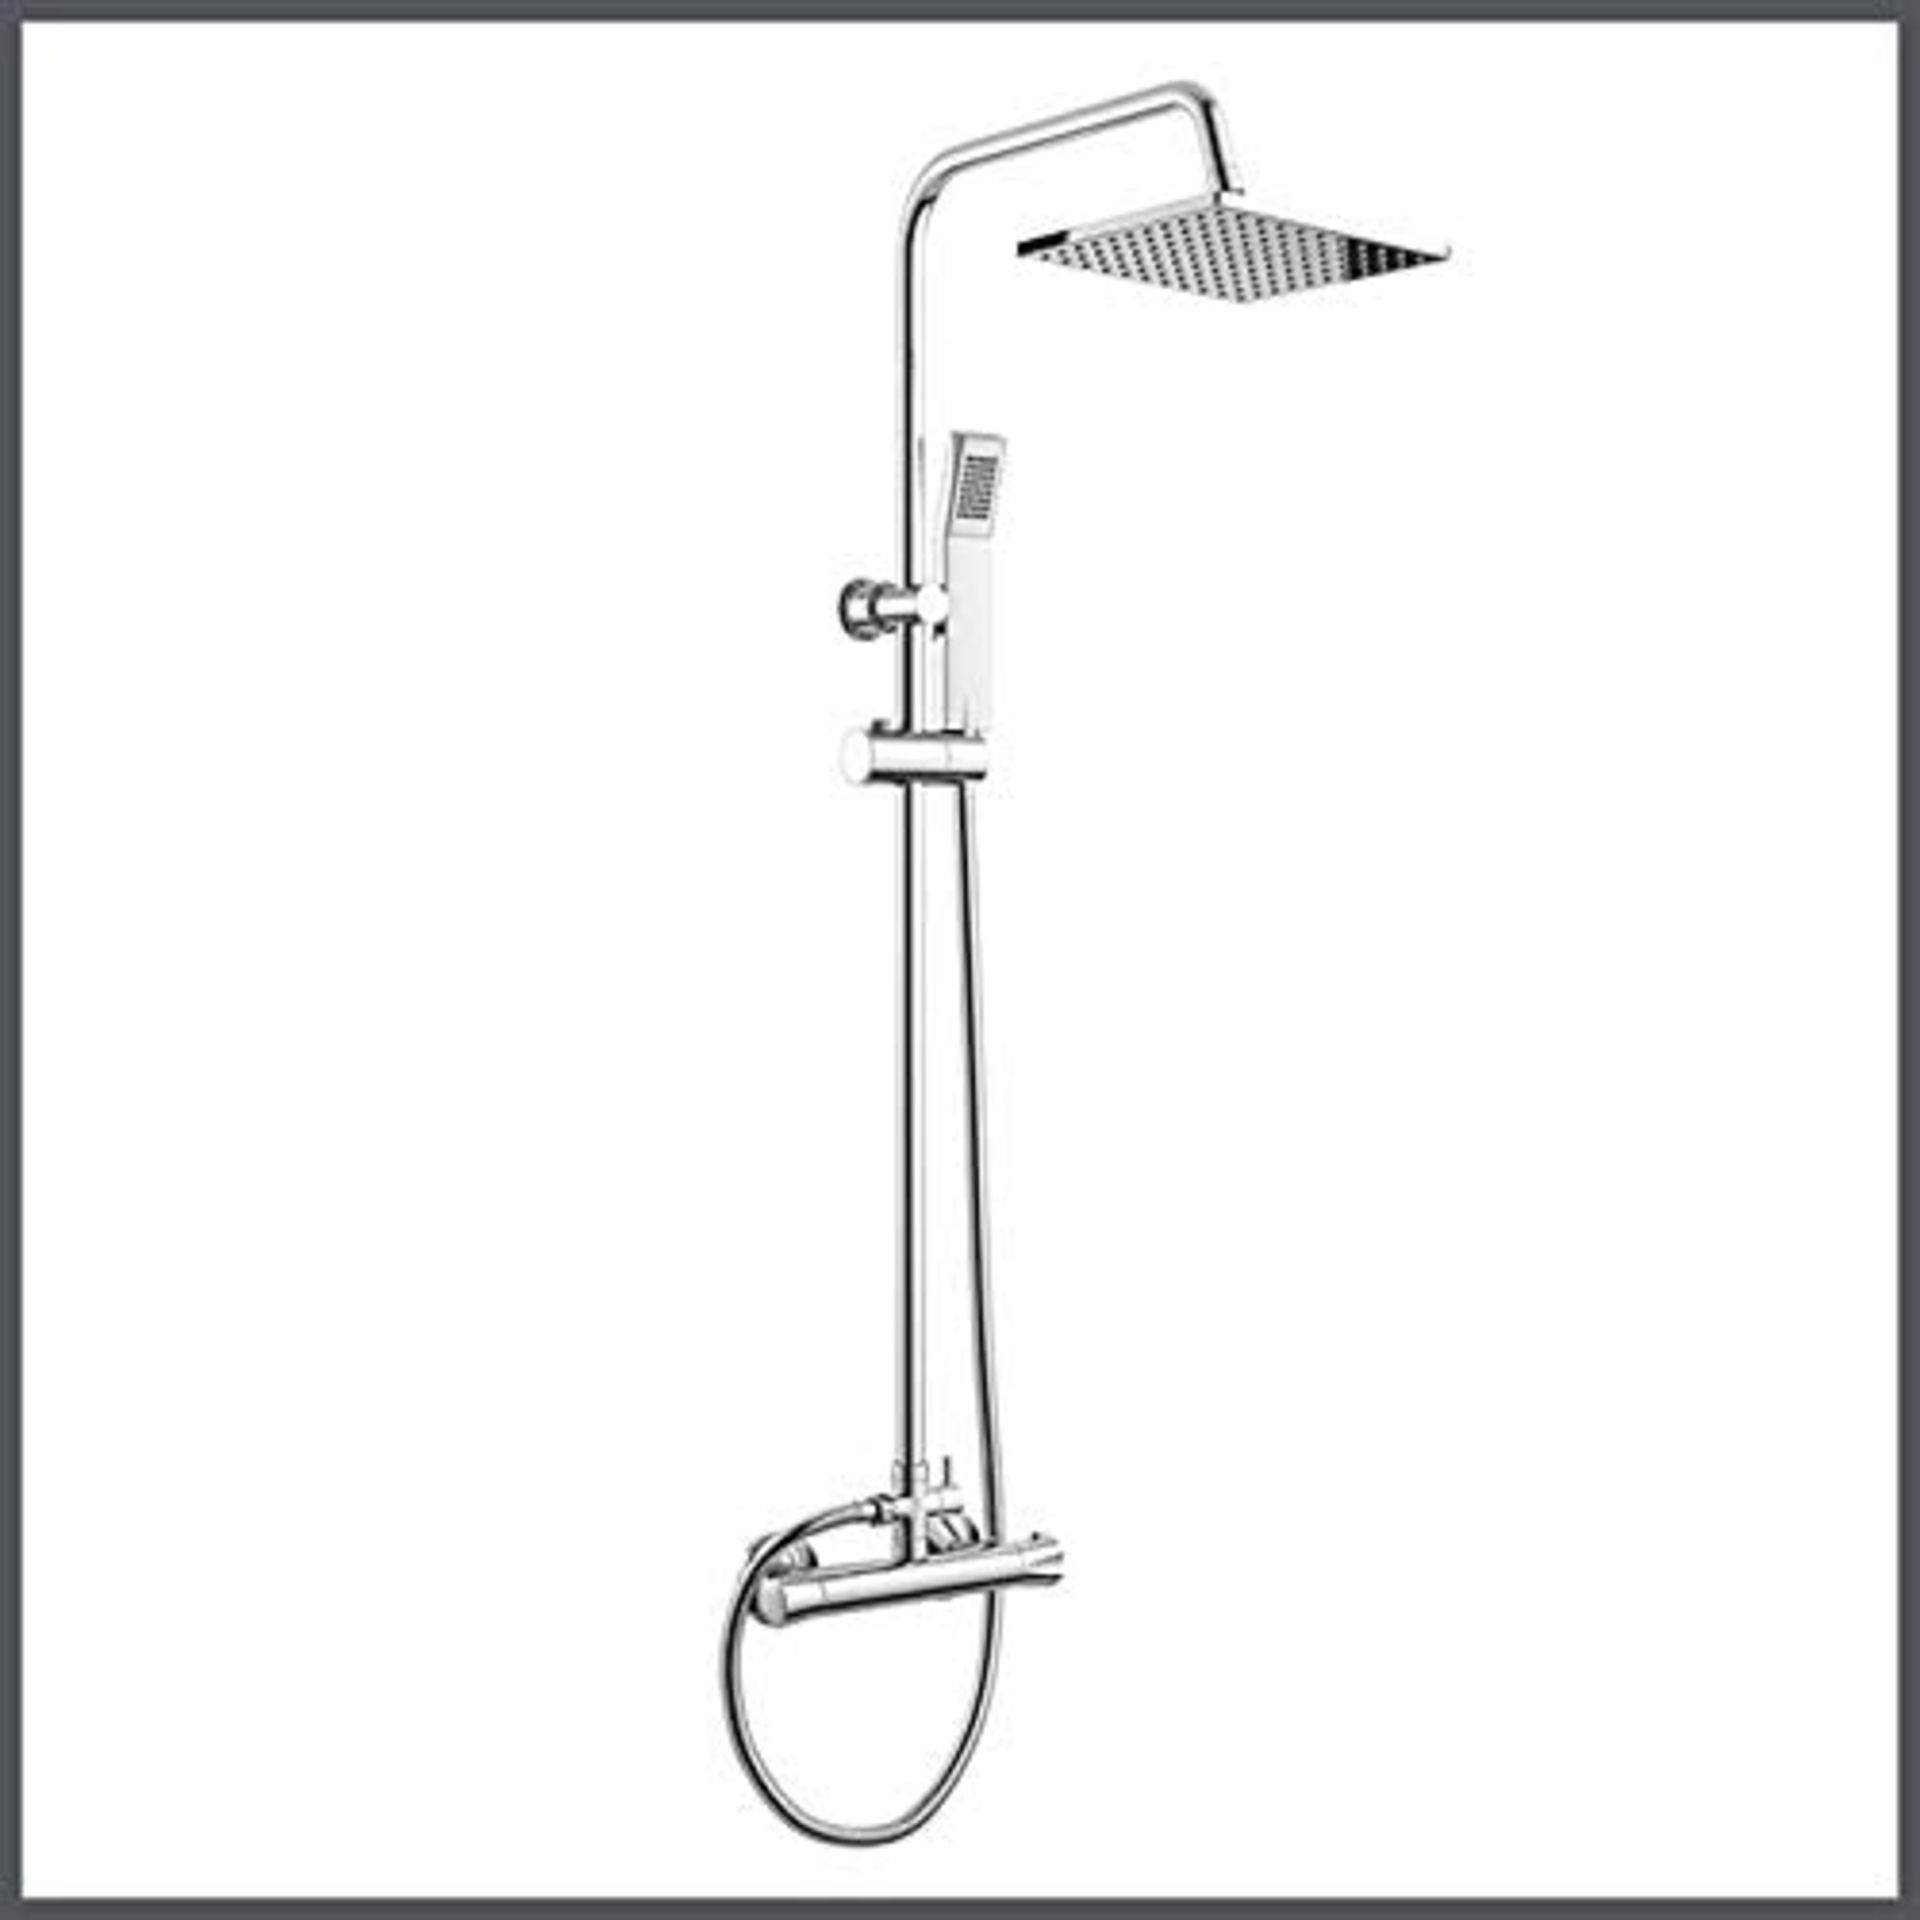 NEW & BOXED Exposed Thermostatic 2-Way Bar Mixer Shower Set Chrome Valve 200mm Square Head + - Image 2 of 2